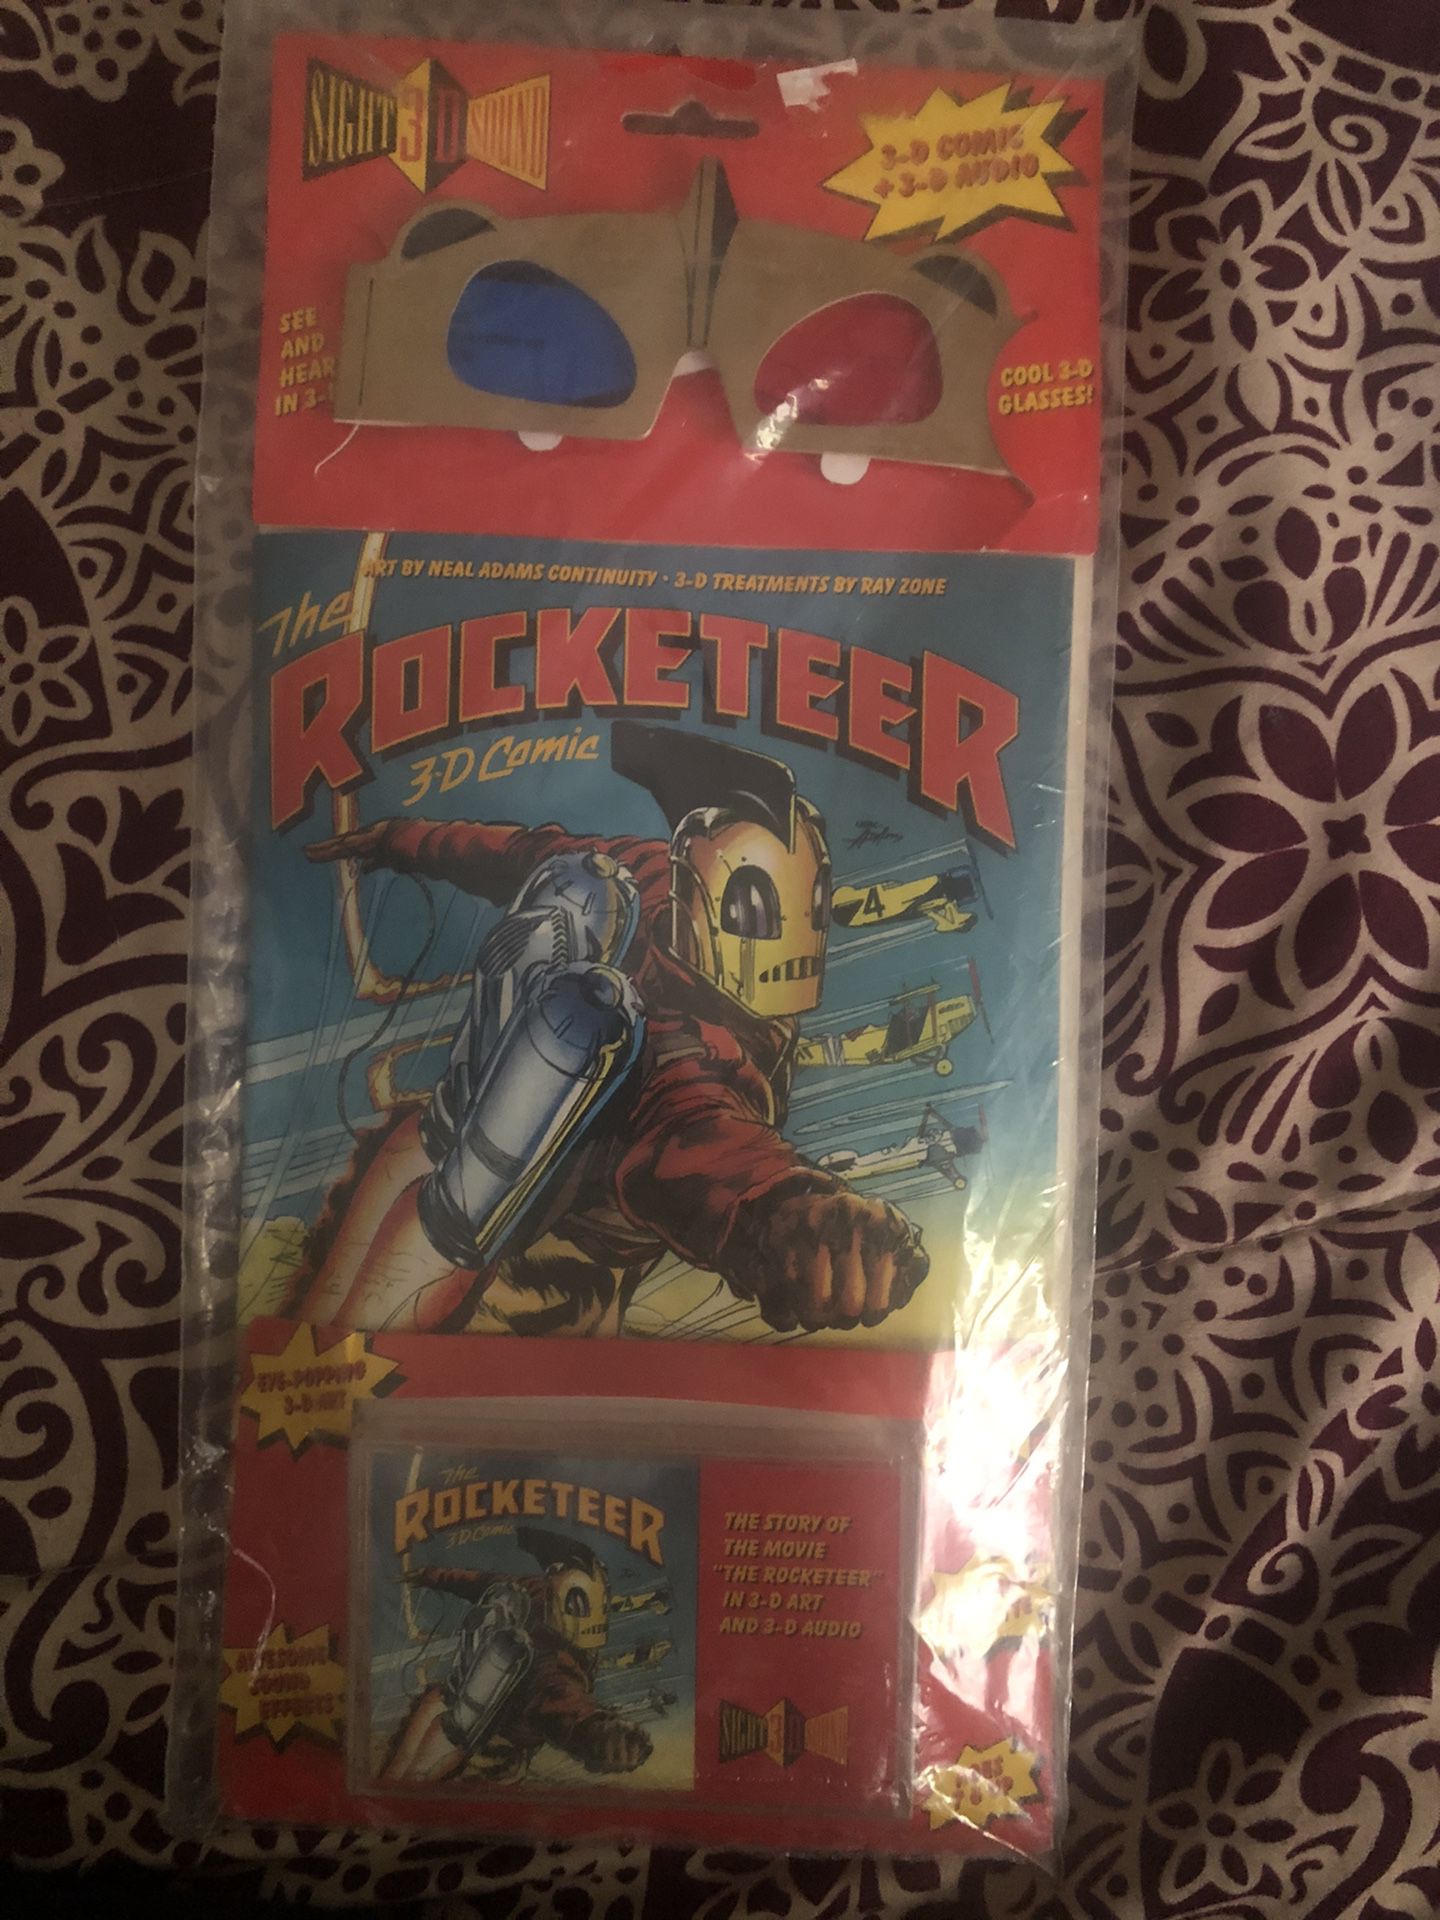 The rocketeer 3D comic book with 3D glasses and cassette